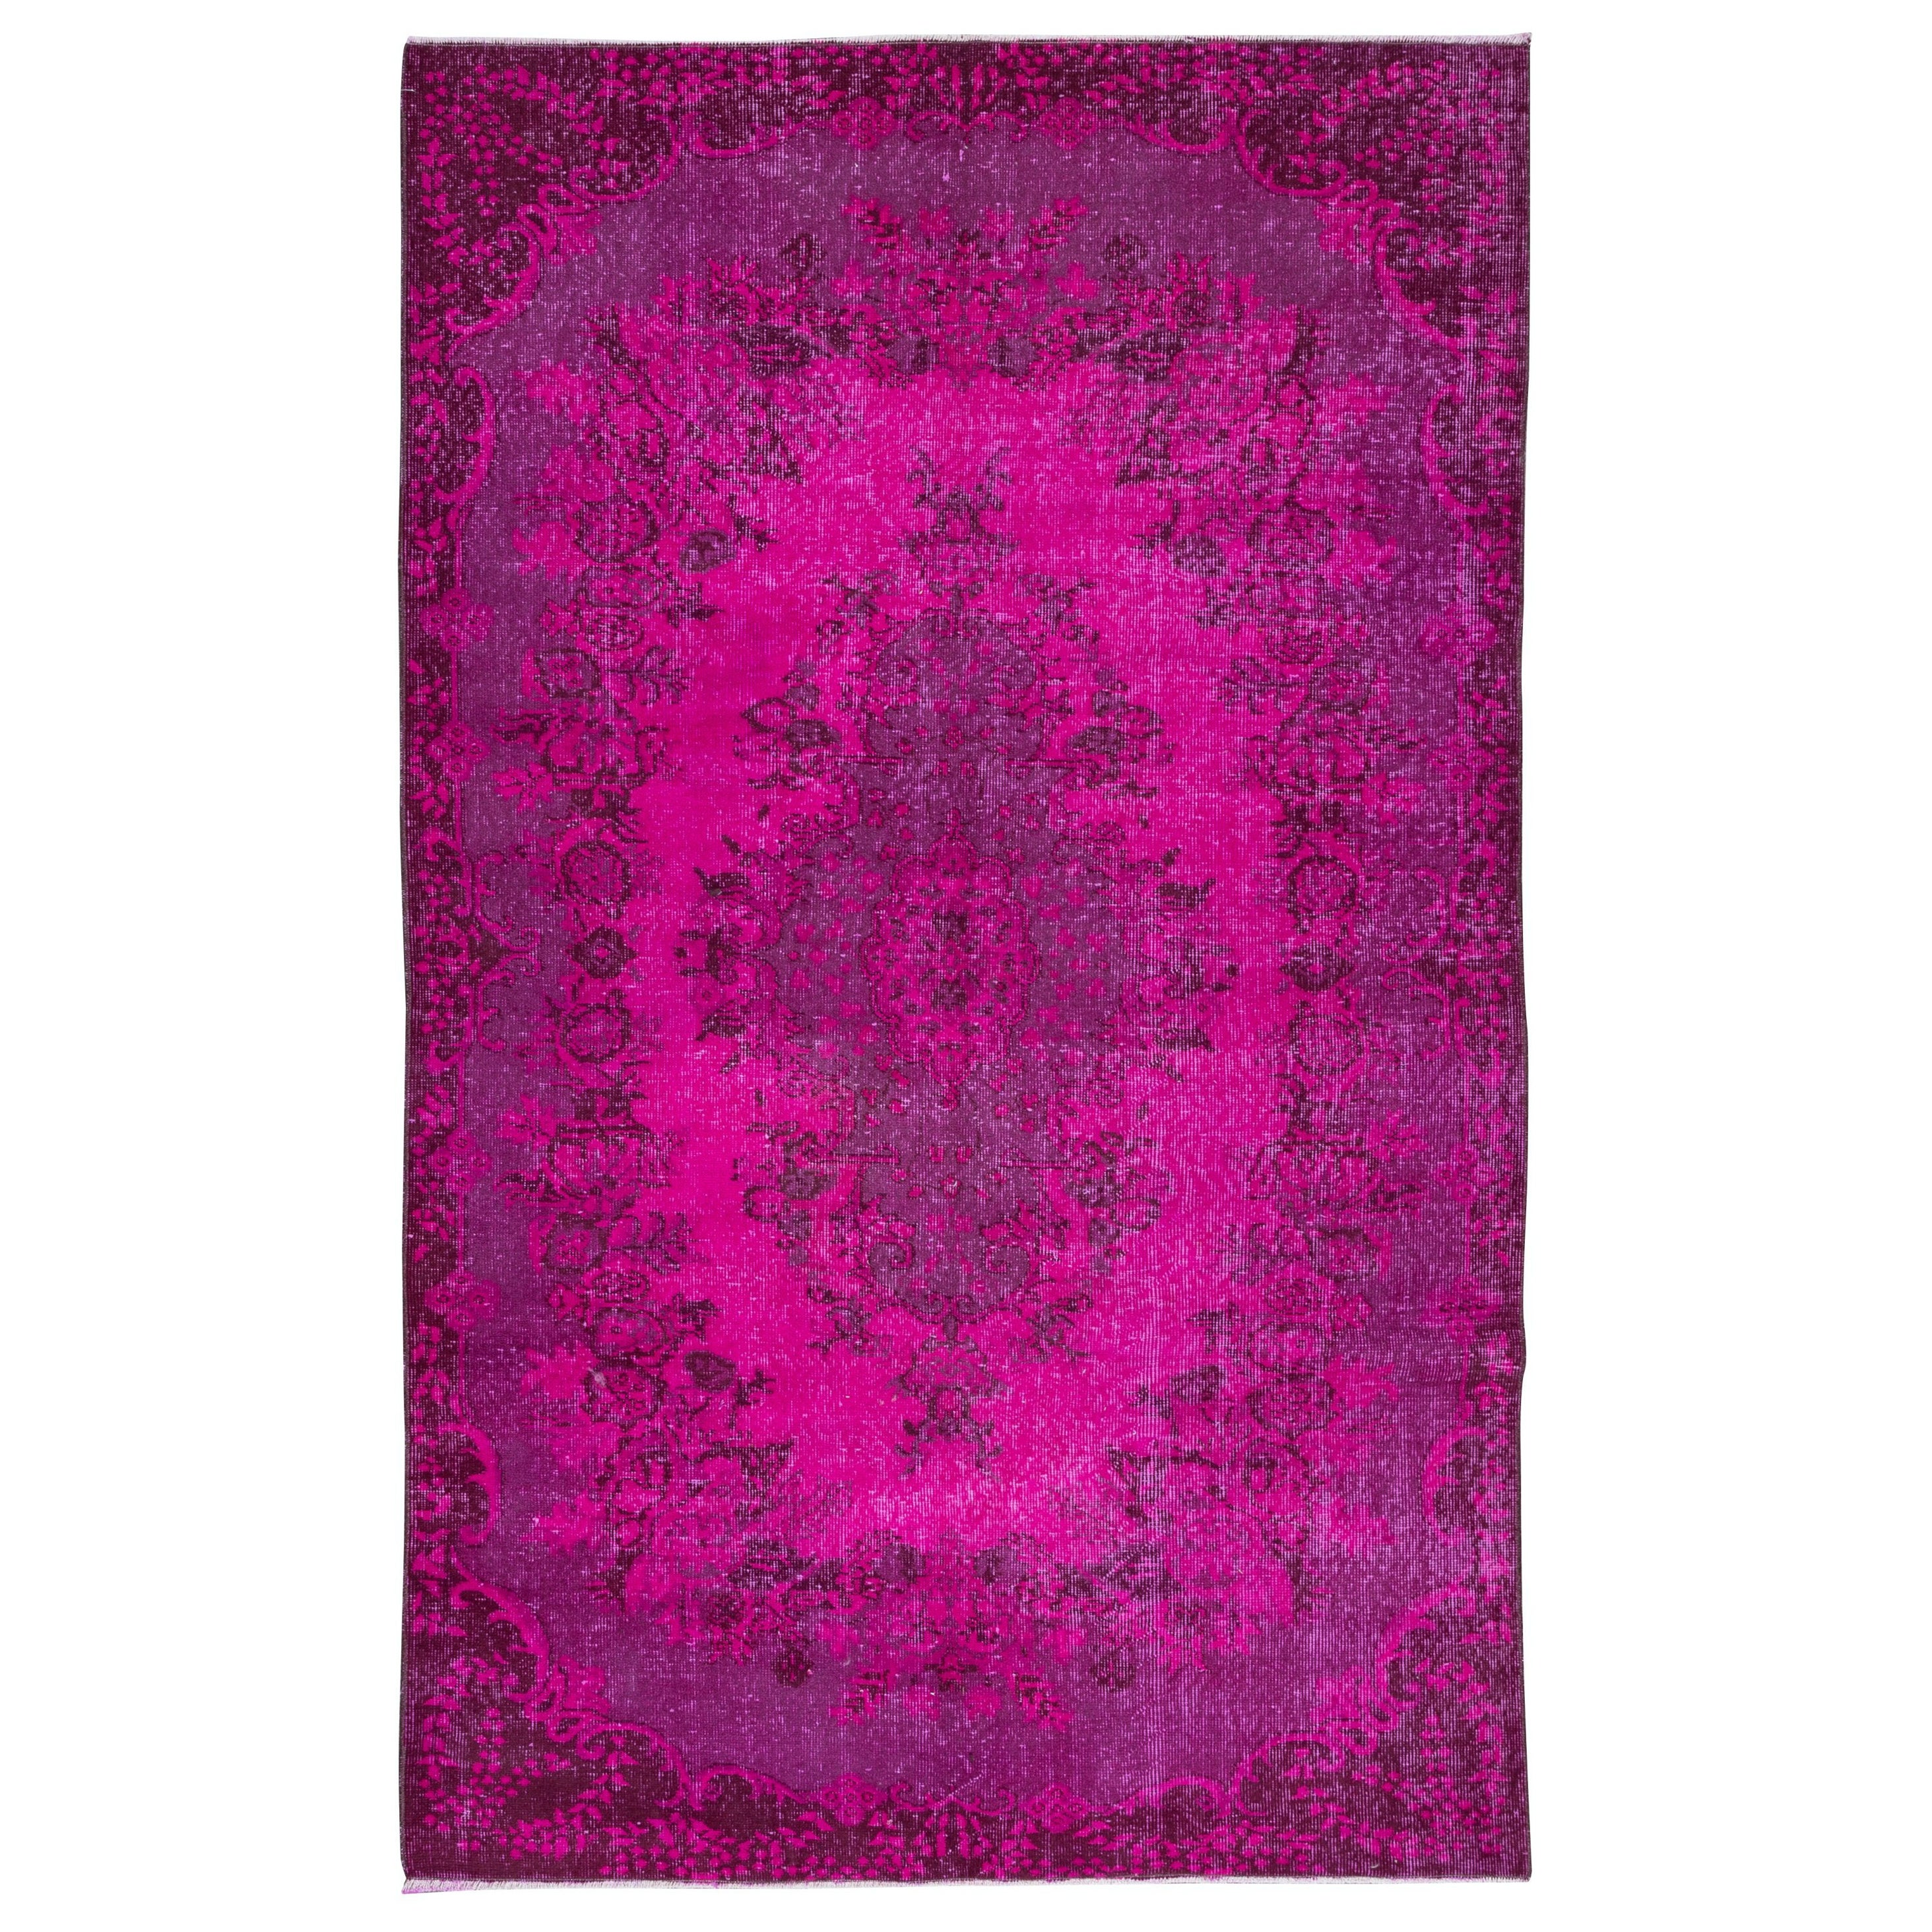 5.5x8.5 Ft Hot Pink Handmade Turkish Low Pile Rug with Medallion, Floor Covering